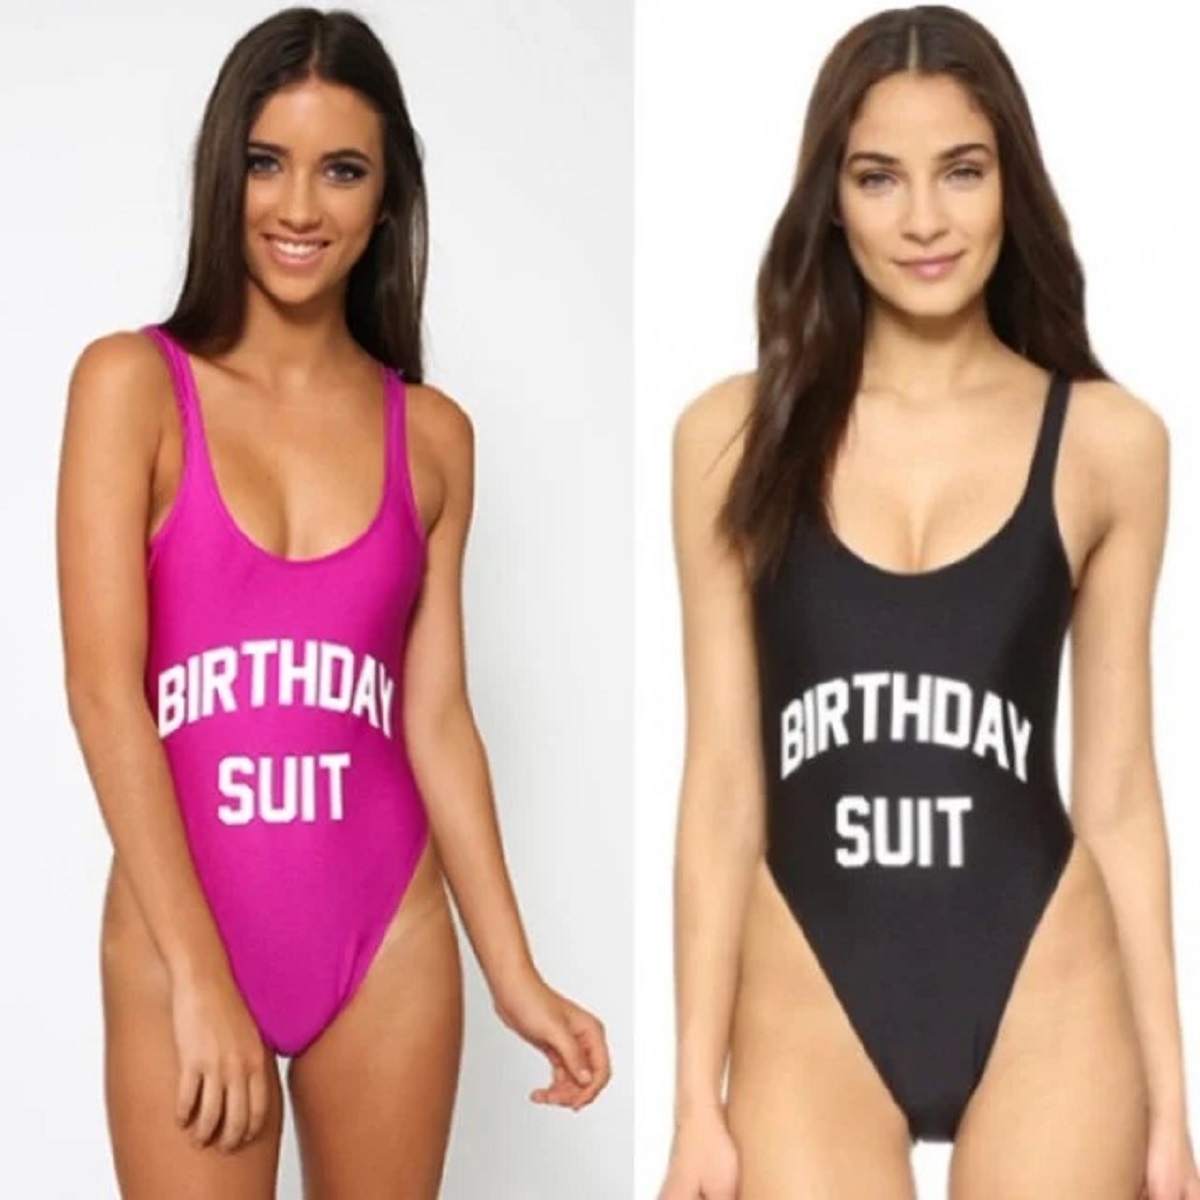 I thought a birthday suit was just your favorite outfit. Like, you save this special outfit for an celebratory occasion. Always got weird looks when I told people I was going shopping for my birthday suit. I wish I was joking.